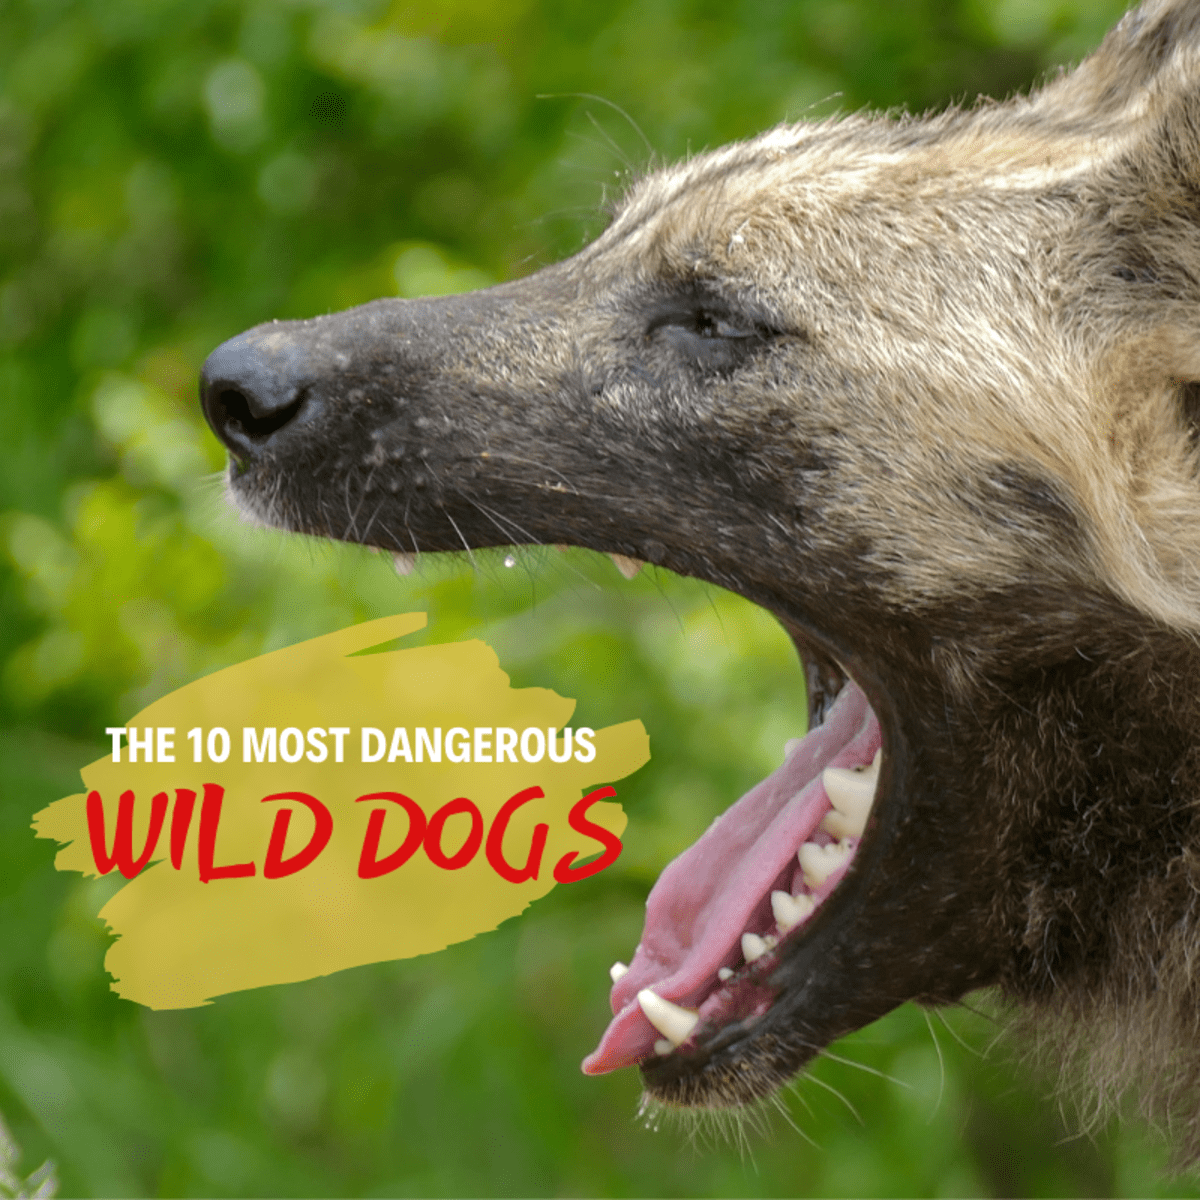 Top 10 Most Dangerous Wild Dogs: Tanukis, Dingoes, and More - PetHelpful